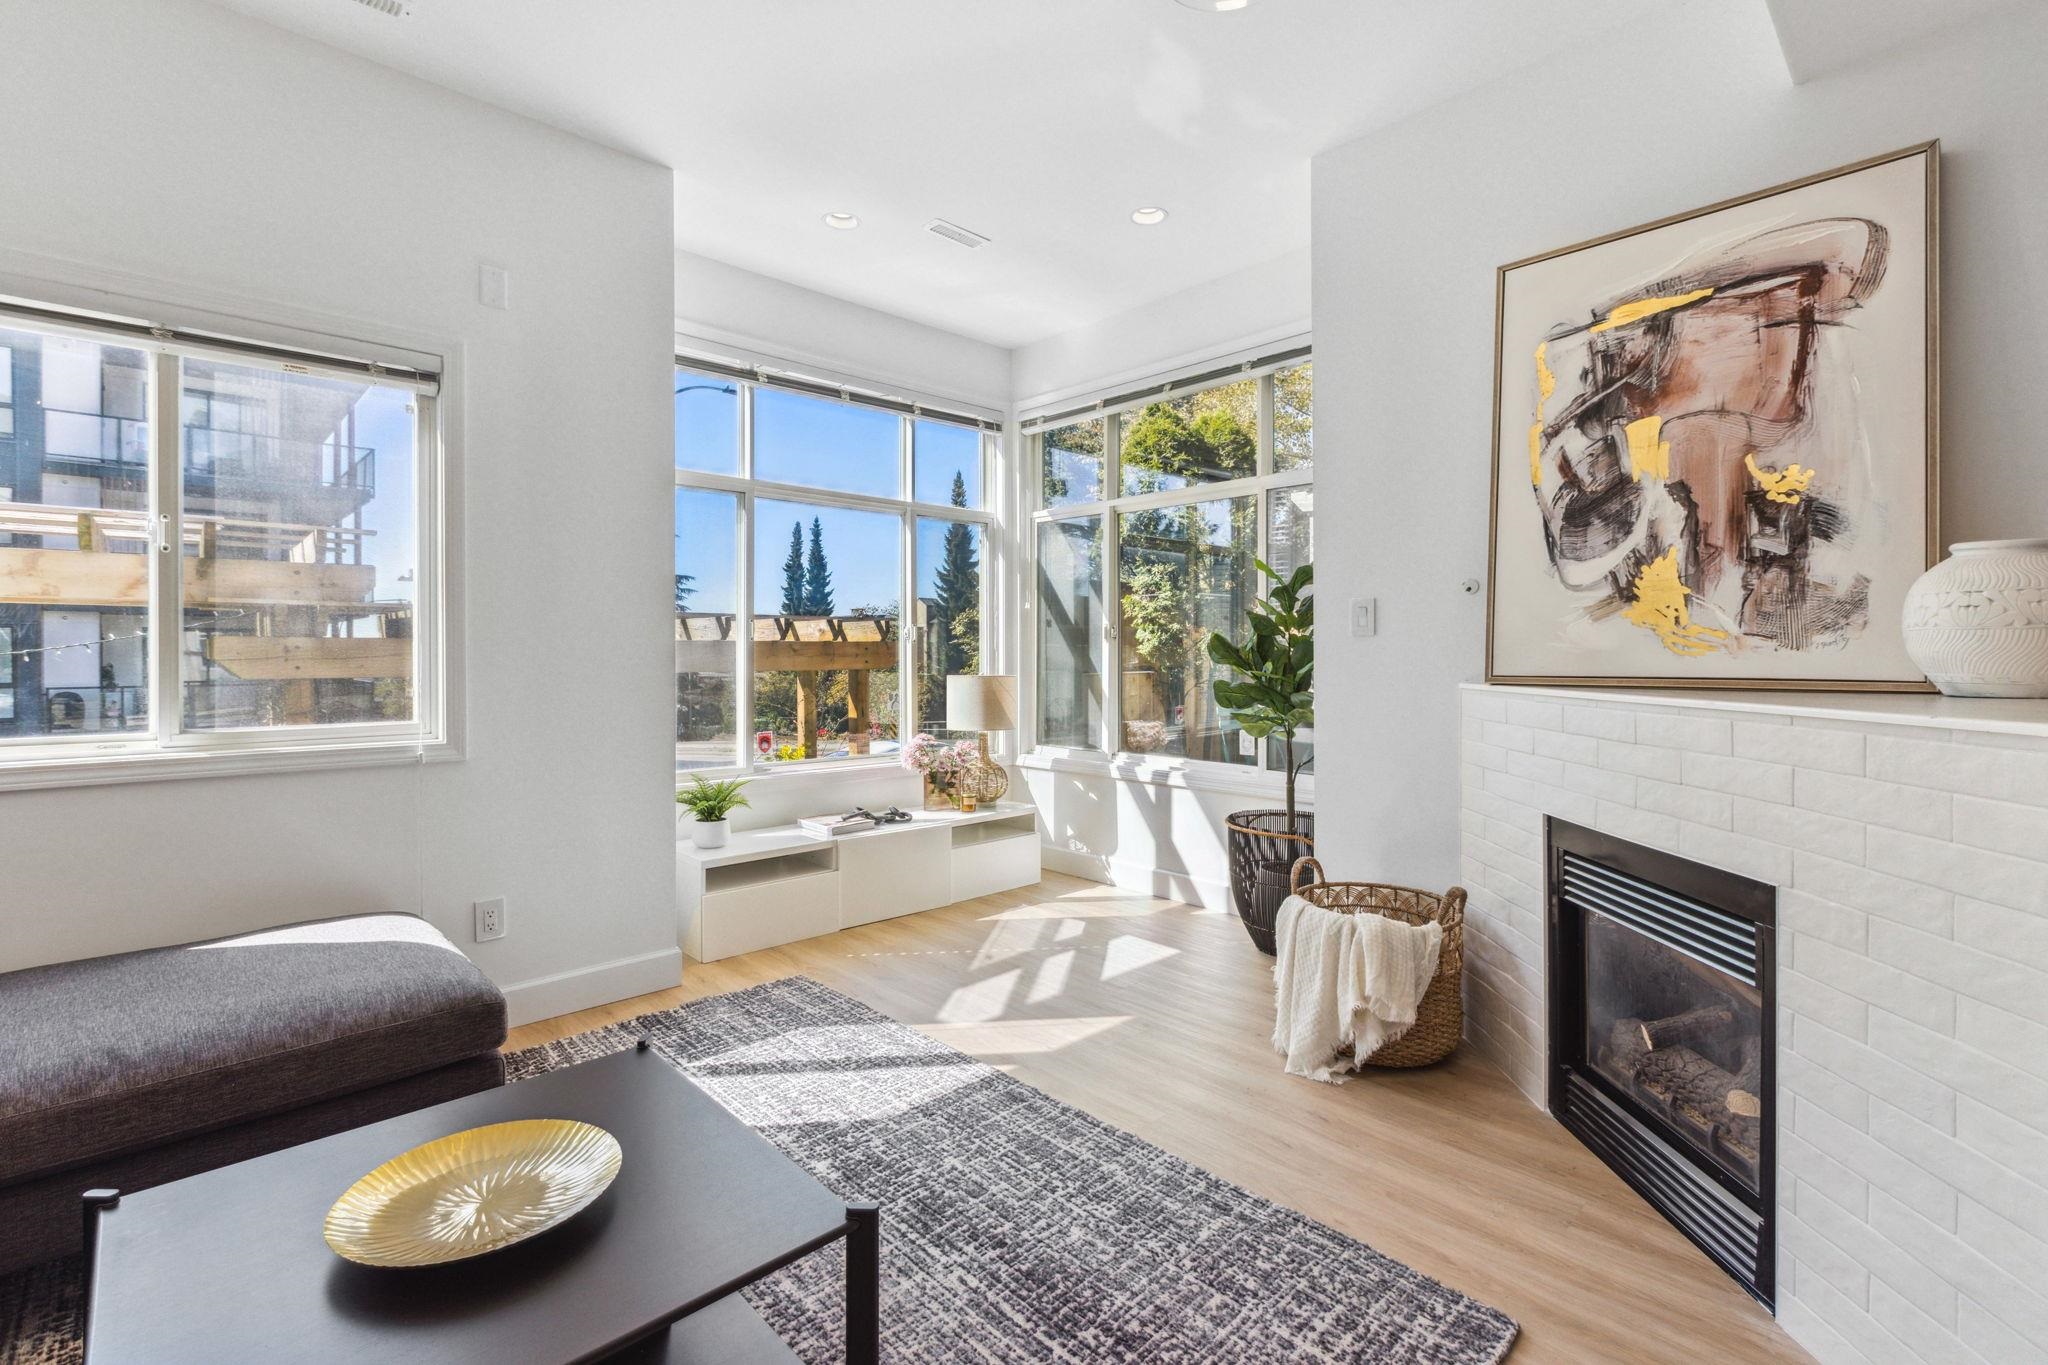 Listing image of 2606 LONSDALE AVENUE